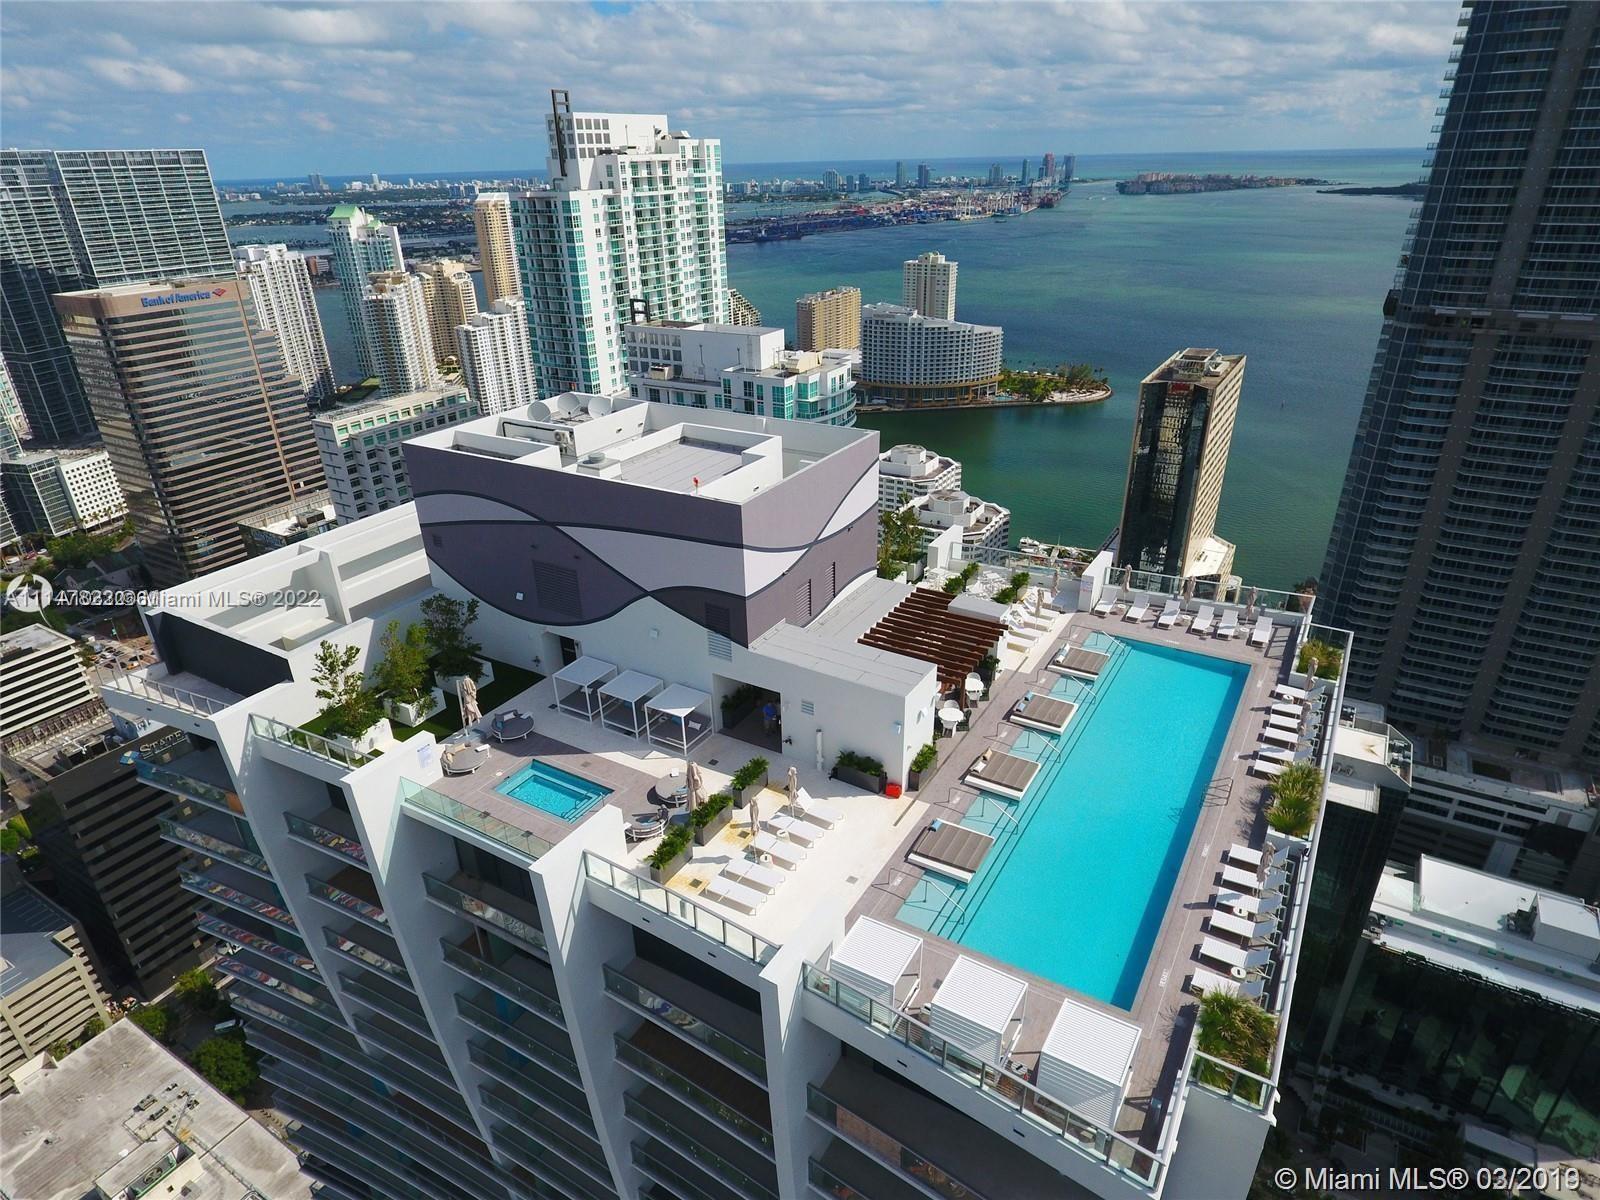 Beautiful apartment in the heart of Brickell, close to all the restaurants and shops, amenities like